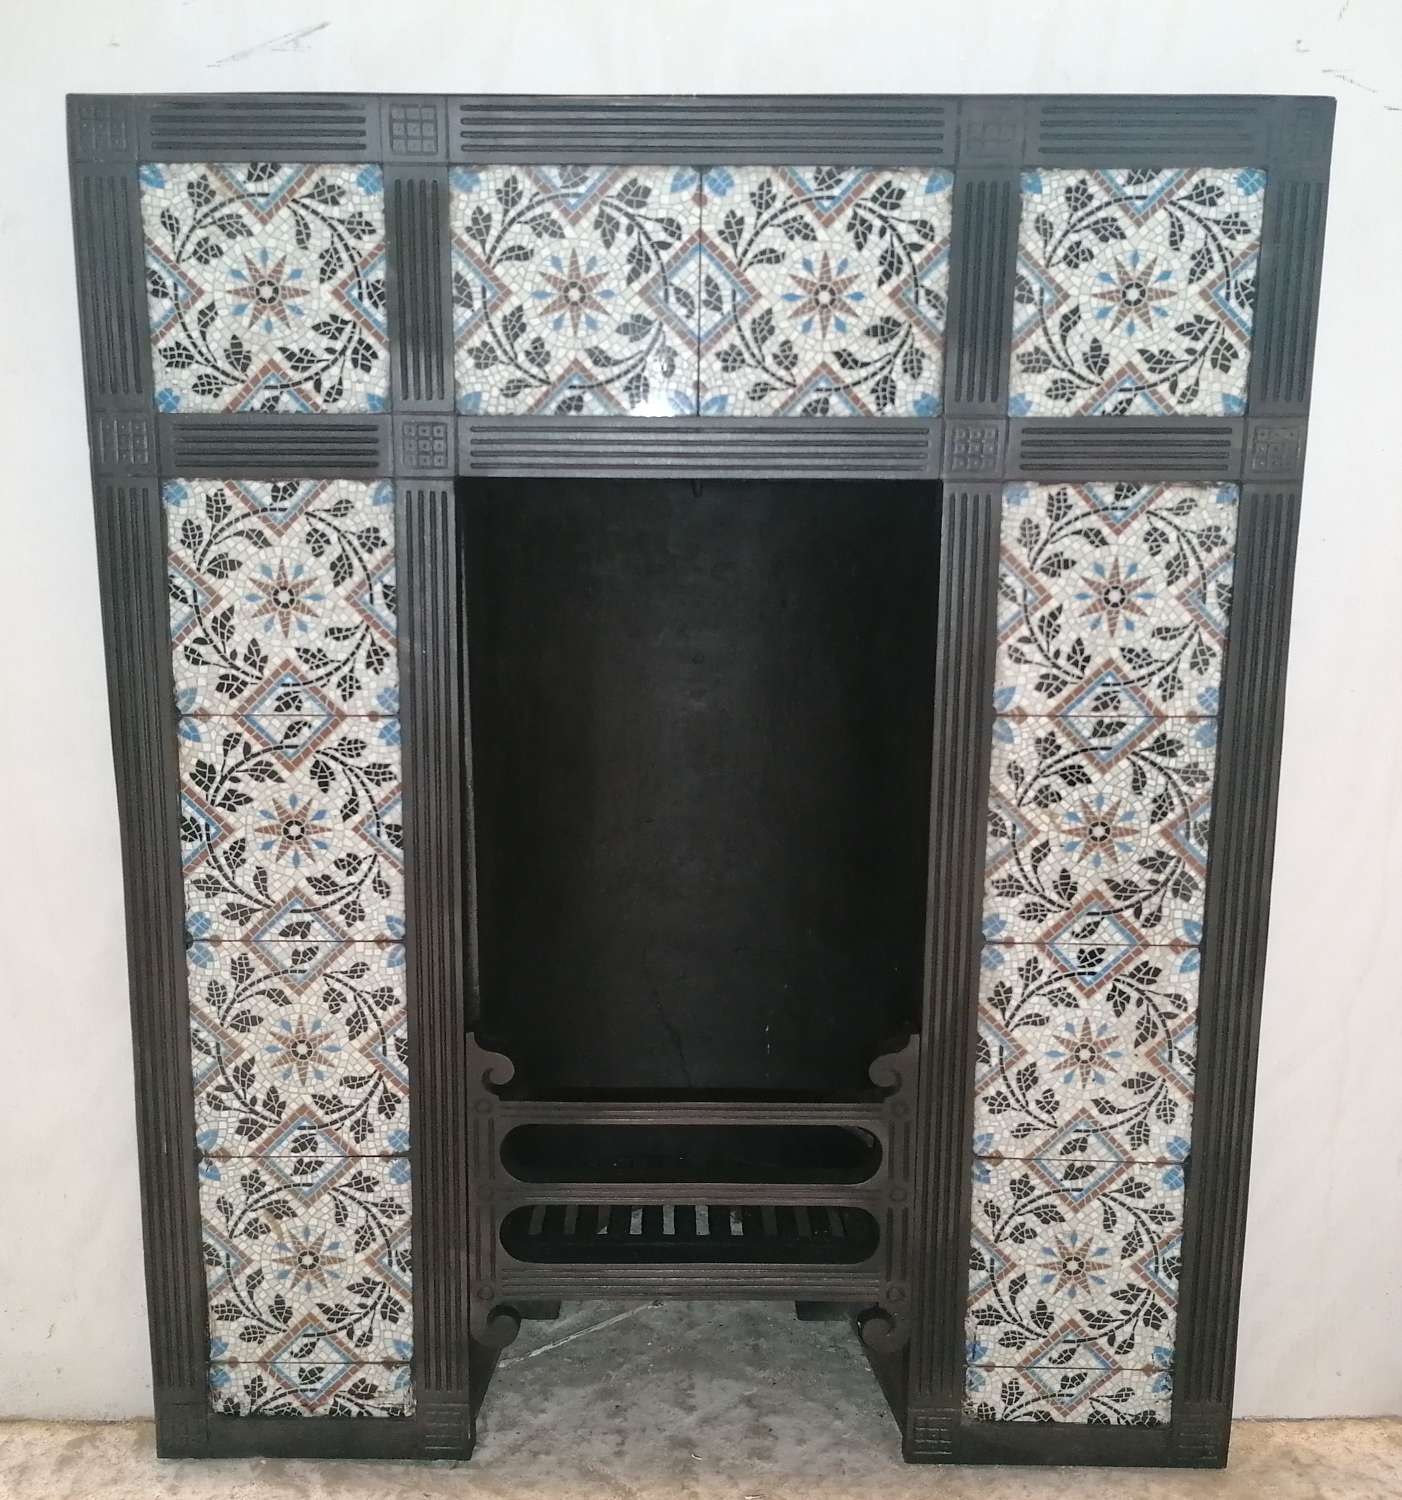 FI0063 A RARE AND VERY ATTRACTIVE MOSAIC TILED CAST IRON FIRE INSERT